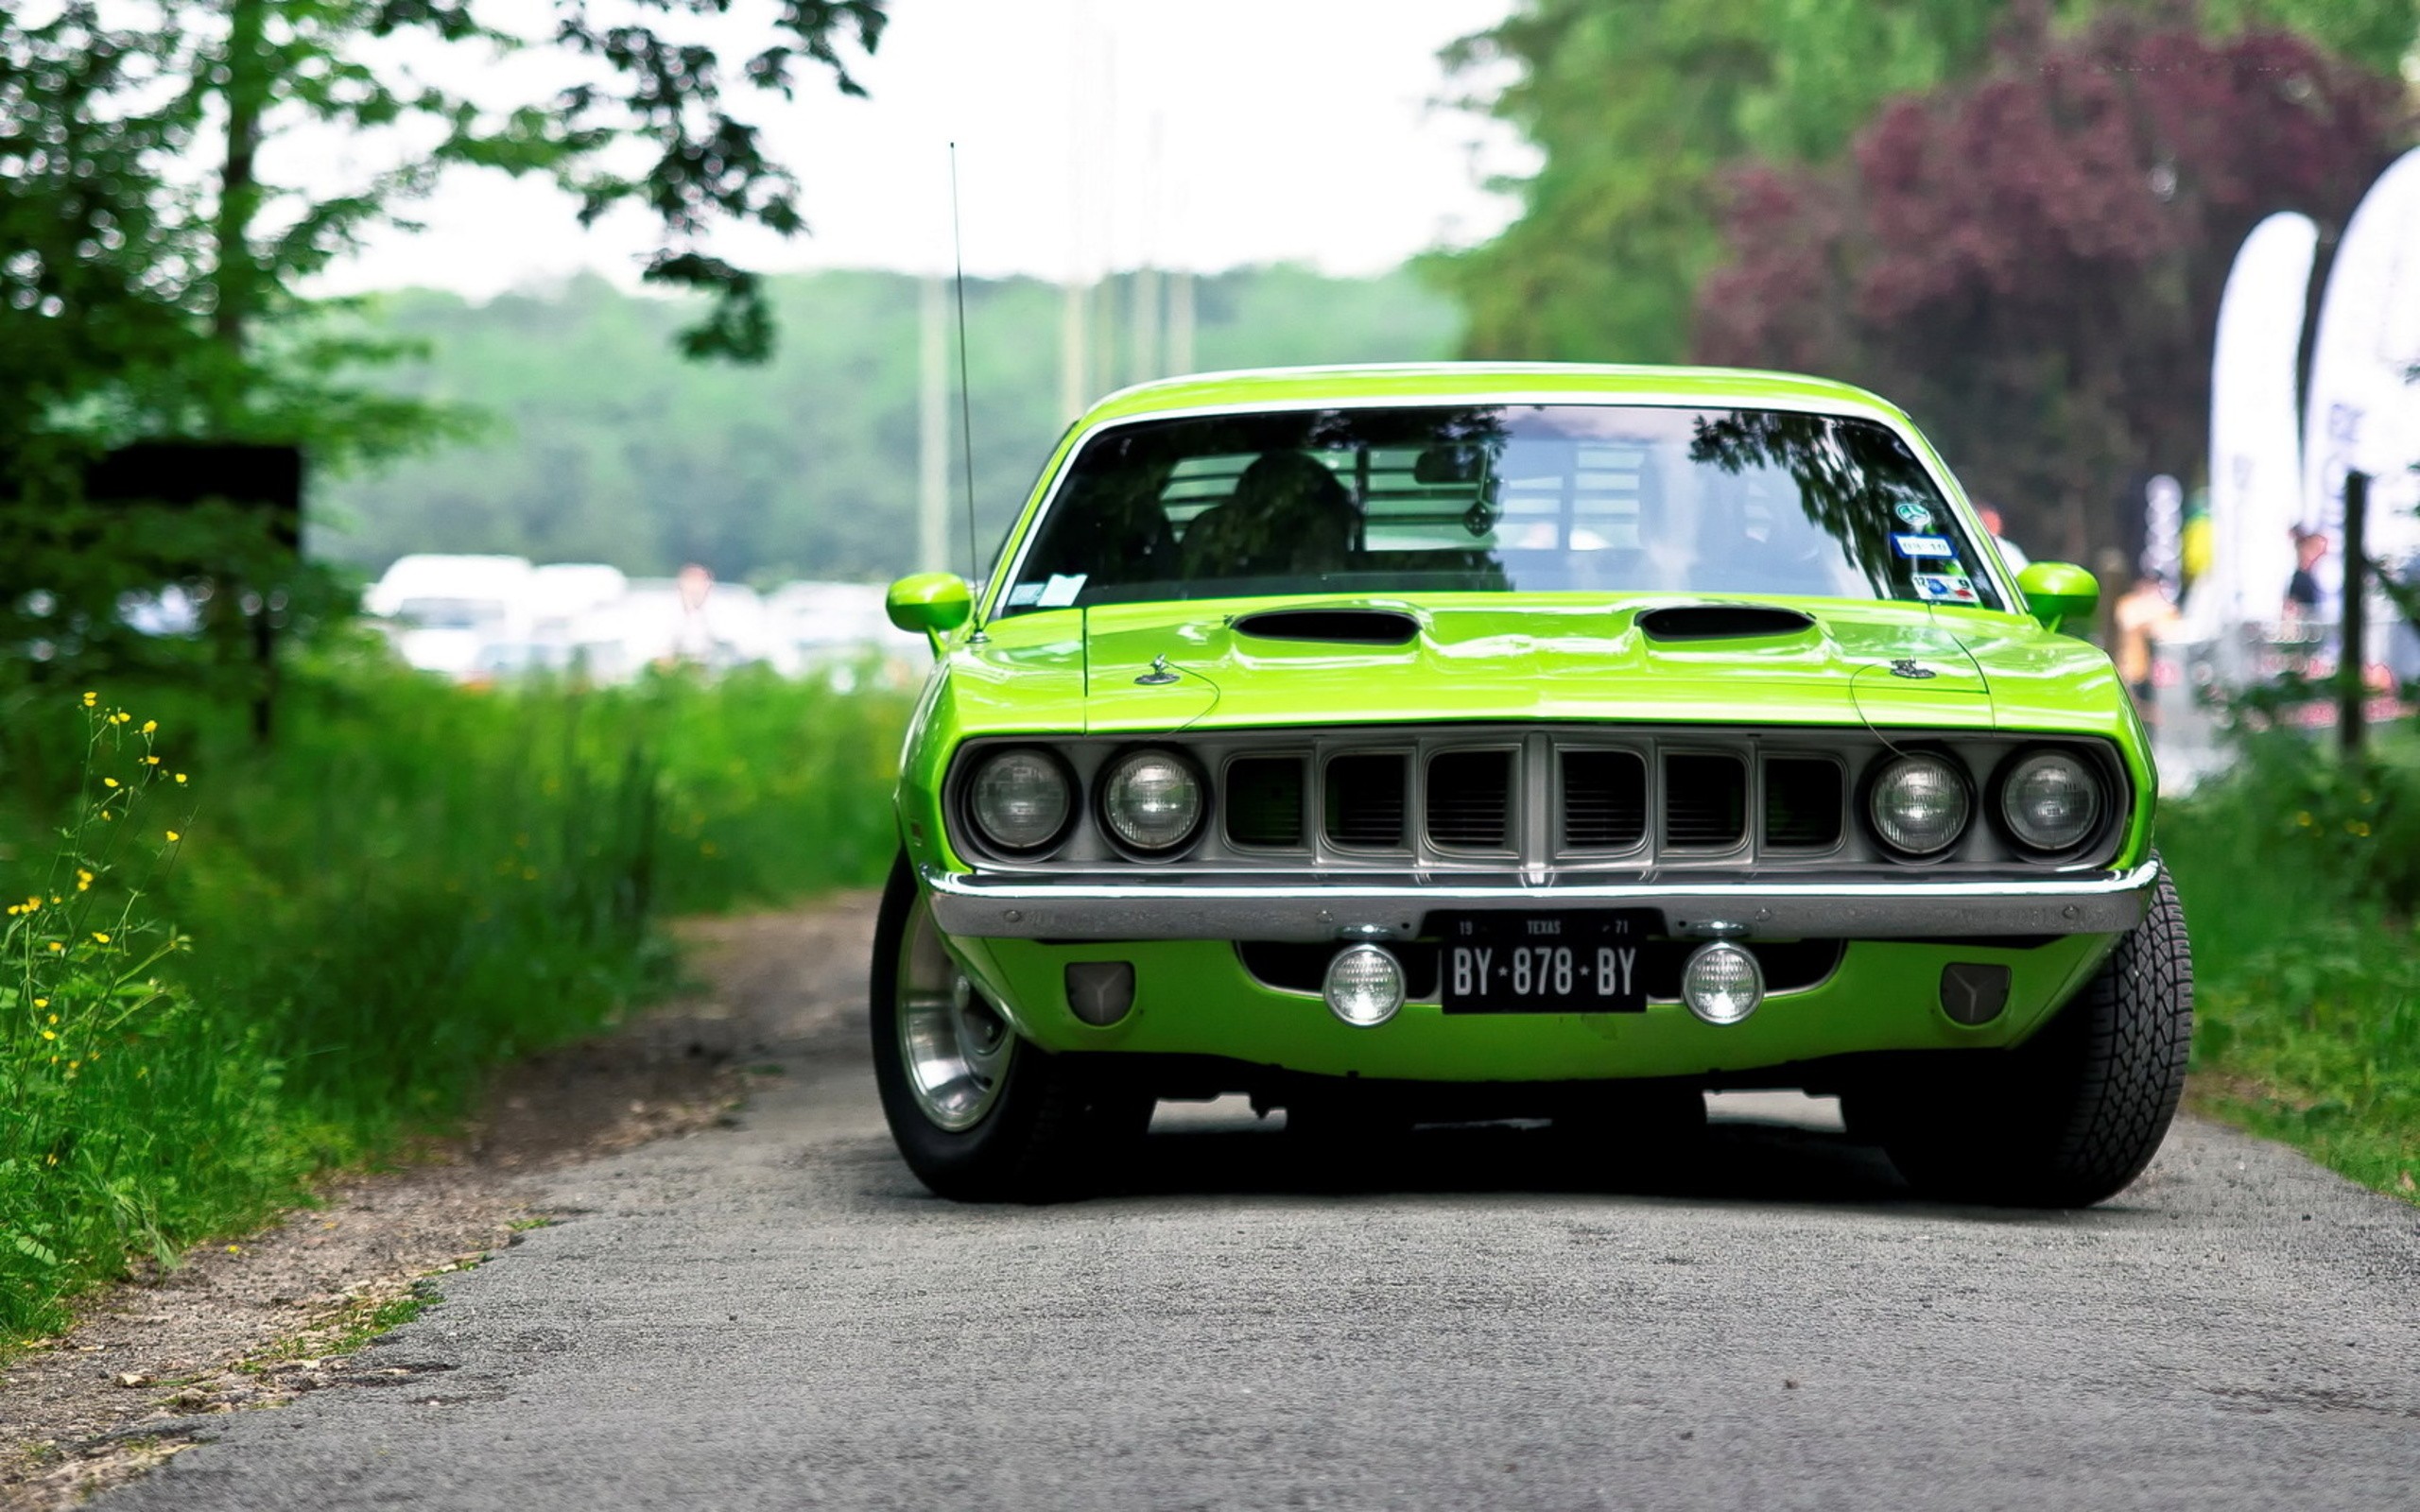 General 2560x1600 car Plymouth Barracuda green cars vehicle numbers frontal view Plymouth muscle cars American cars